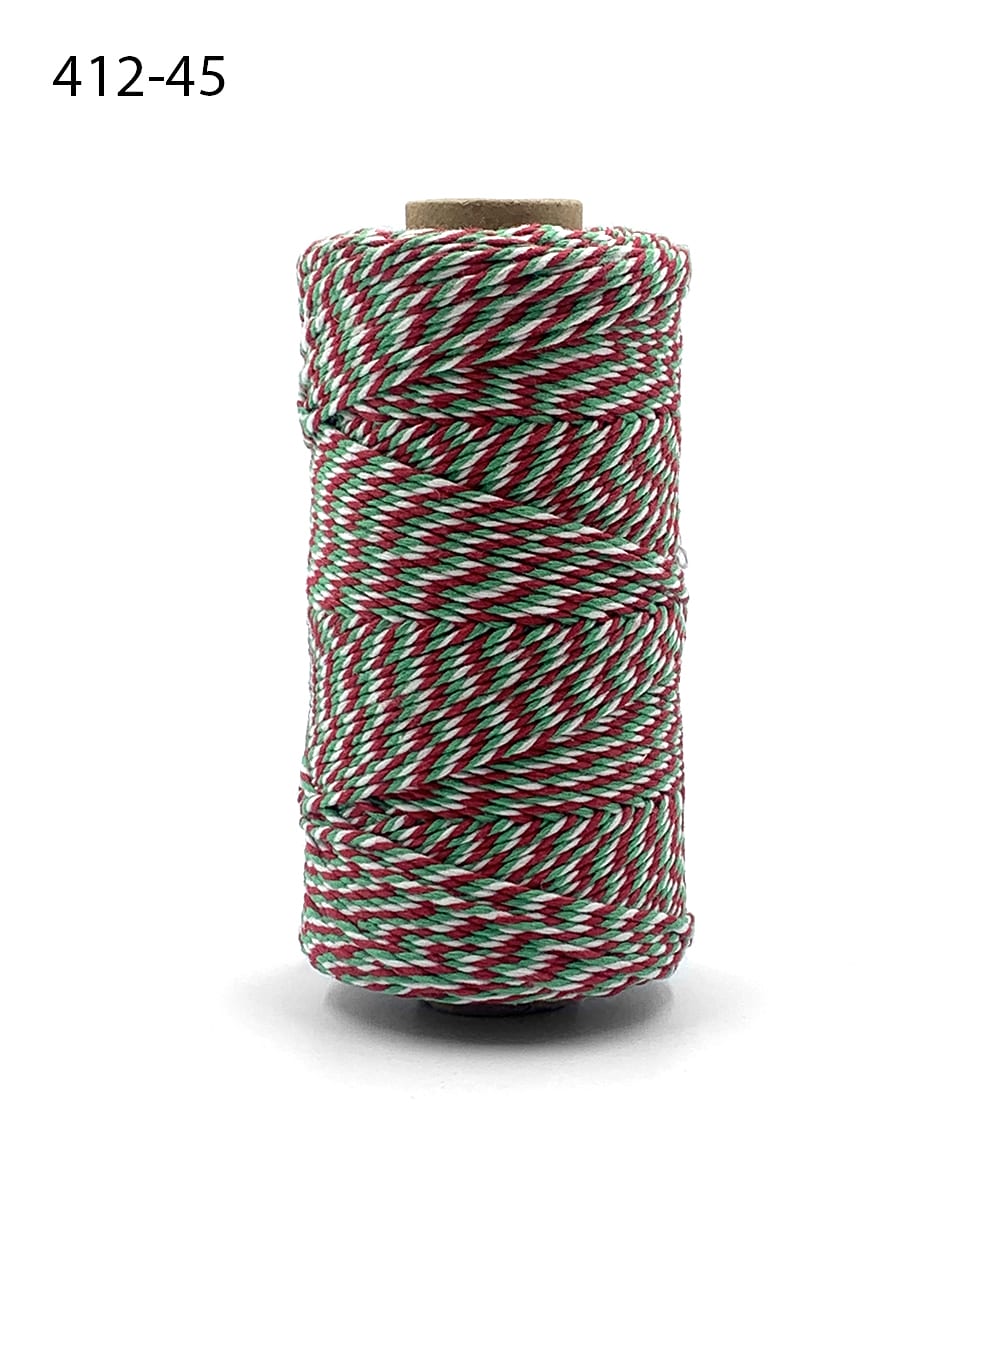 2 PACKS Bakers Twine, 656 Feet 2mm Striped Cotton Twine Ribbon, Christmas  Twine for Gift Wrapping, Baking, Crafting and Festival Decoration (328  Feet/Roll) 